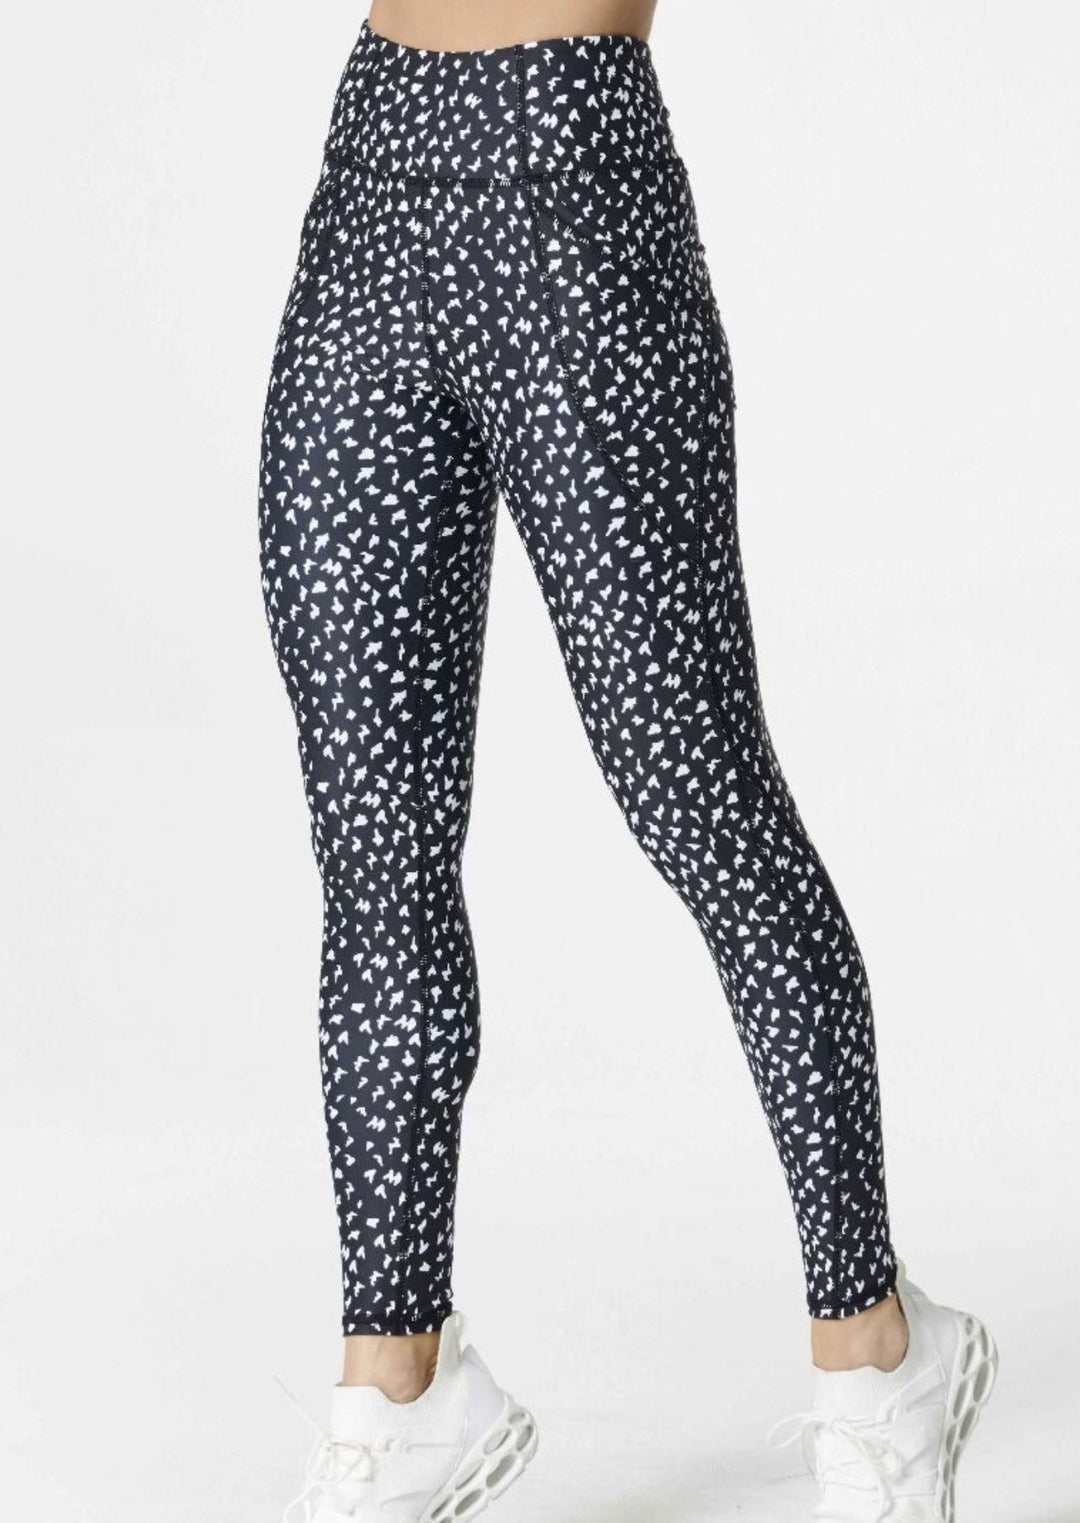 Printed Yoga Leggings with Pockets | NUX | Style #PW0107 | Made in the USA | Classy Cozy Cool Women’s Clothing Boutique